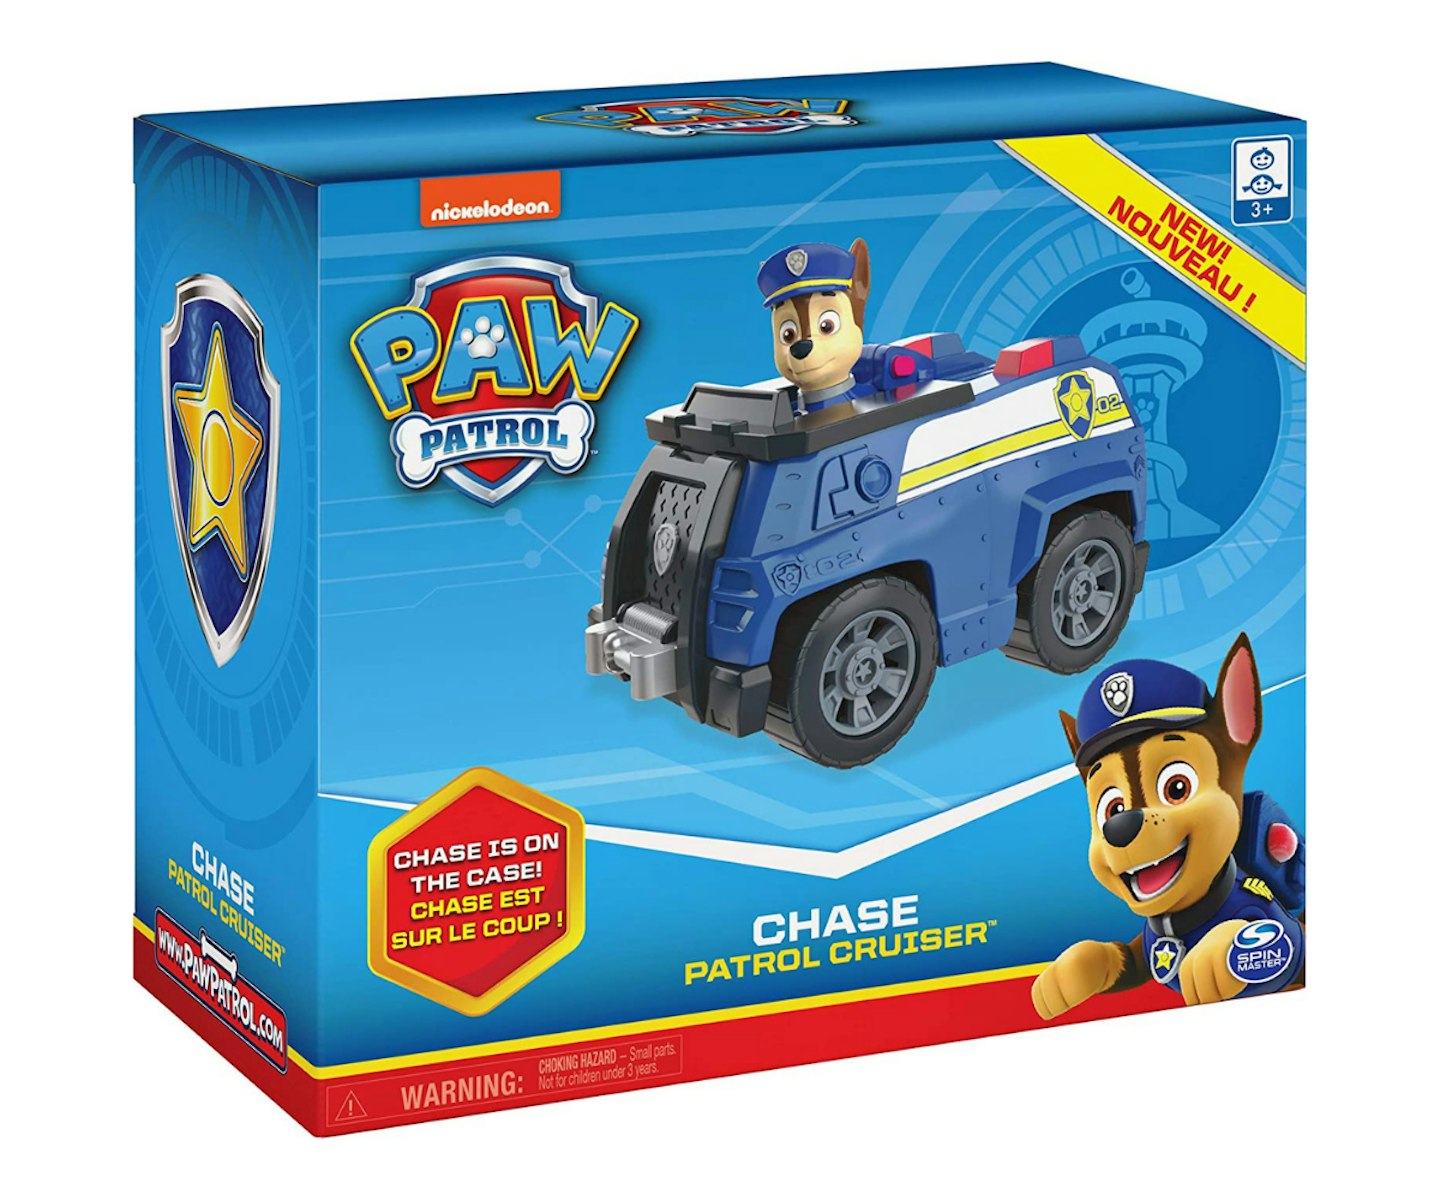 PAW Patrol Chase’s Patrol Cruiser Vehicle with Collectible Figure